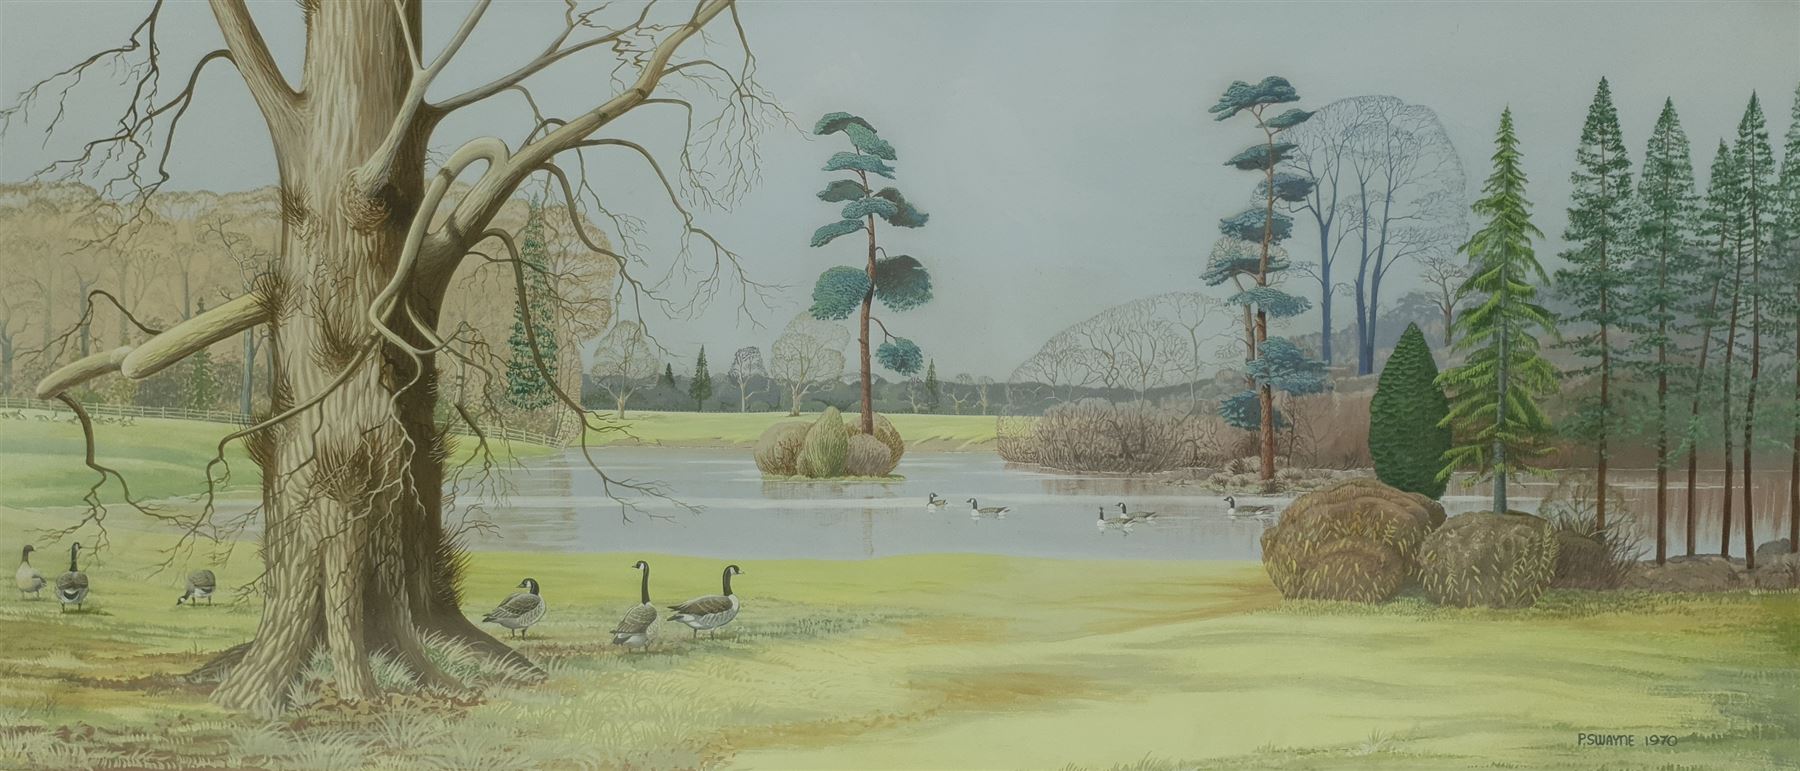 P Swayne (British 20th century): Geese in a River Landscape